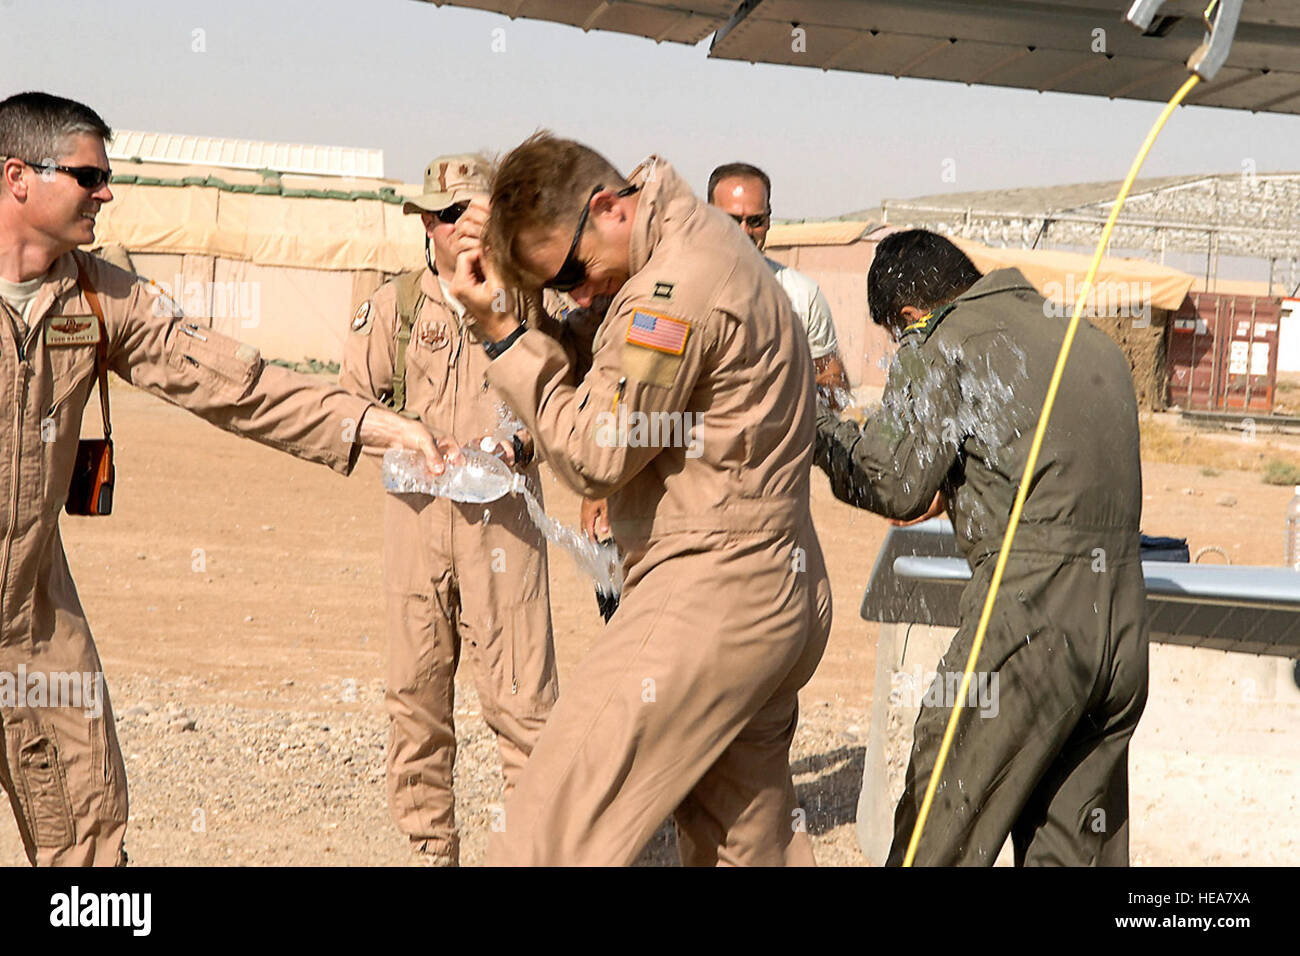 Lt. Col. Todd Daggett (left), 52nd Expeditionary Flying Training Squadron deputy of operations, along with other Airmen from the 52nd EFTS and Iraqi air force Flying Training Wing, congratulate the crew of a Cessna 172 July 13 at Kirkuk Regional Air Base, Iraq, after their historic training sortie that surpassed 2,000 flight training hours. Airman First Class Randi Flaugh) Stock Photo